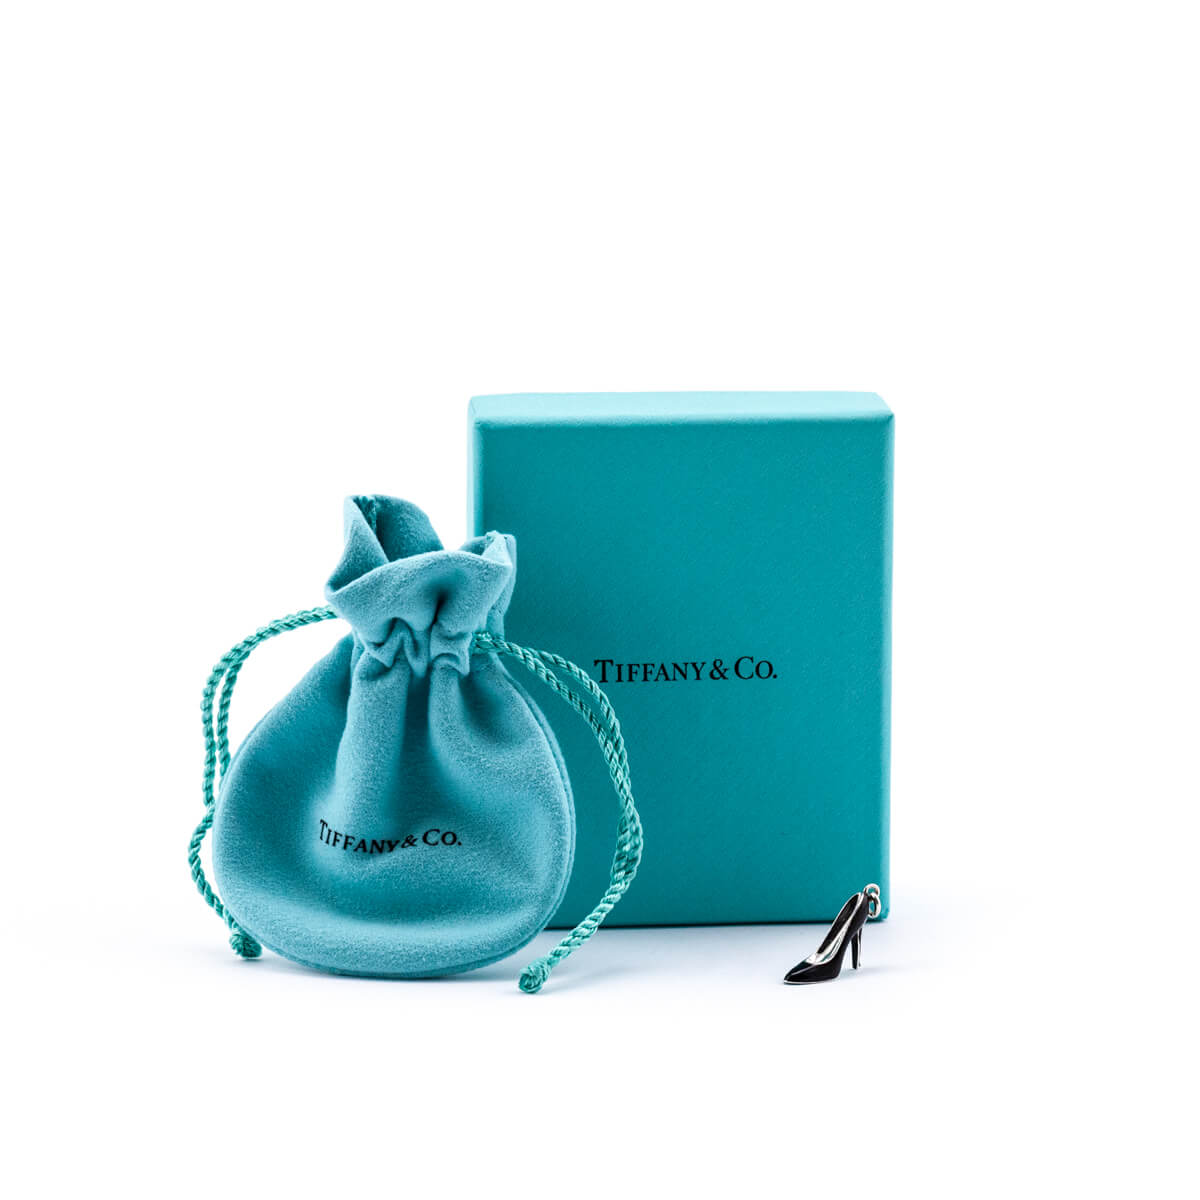 Tiffany & Co.® shopping bag charm in sterling silver with enamel